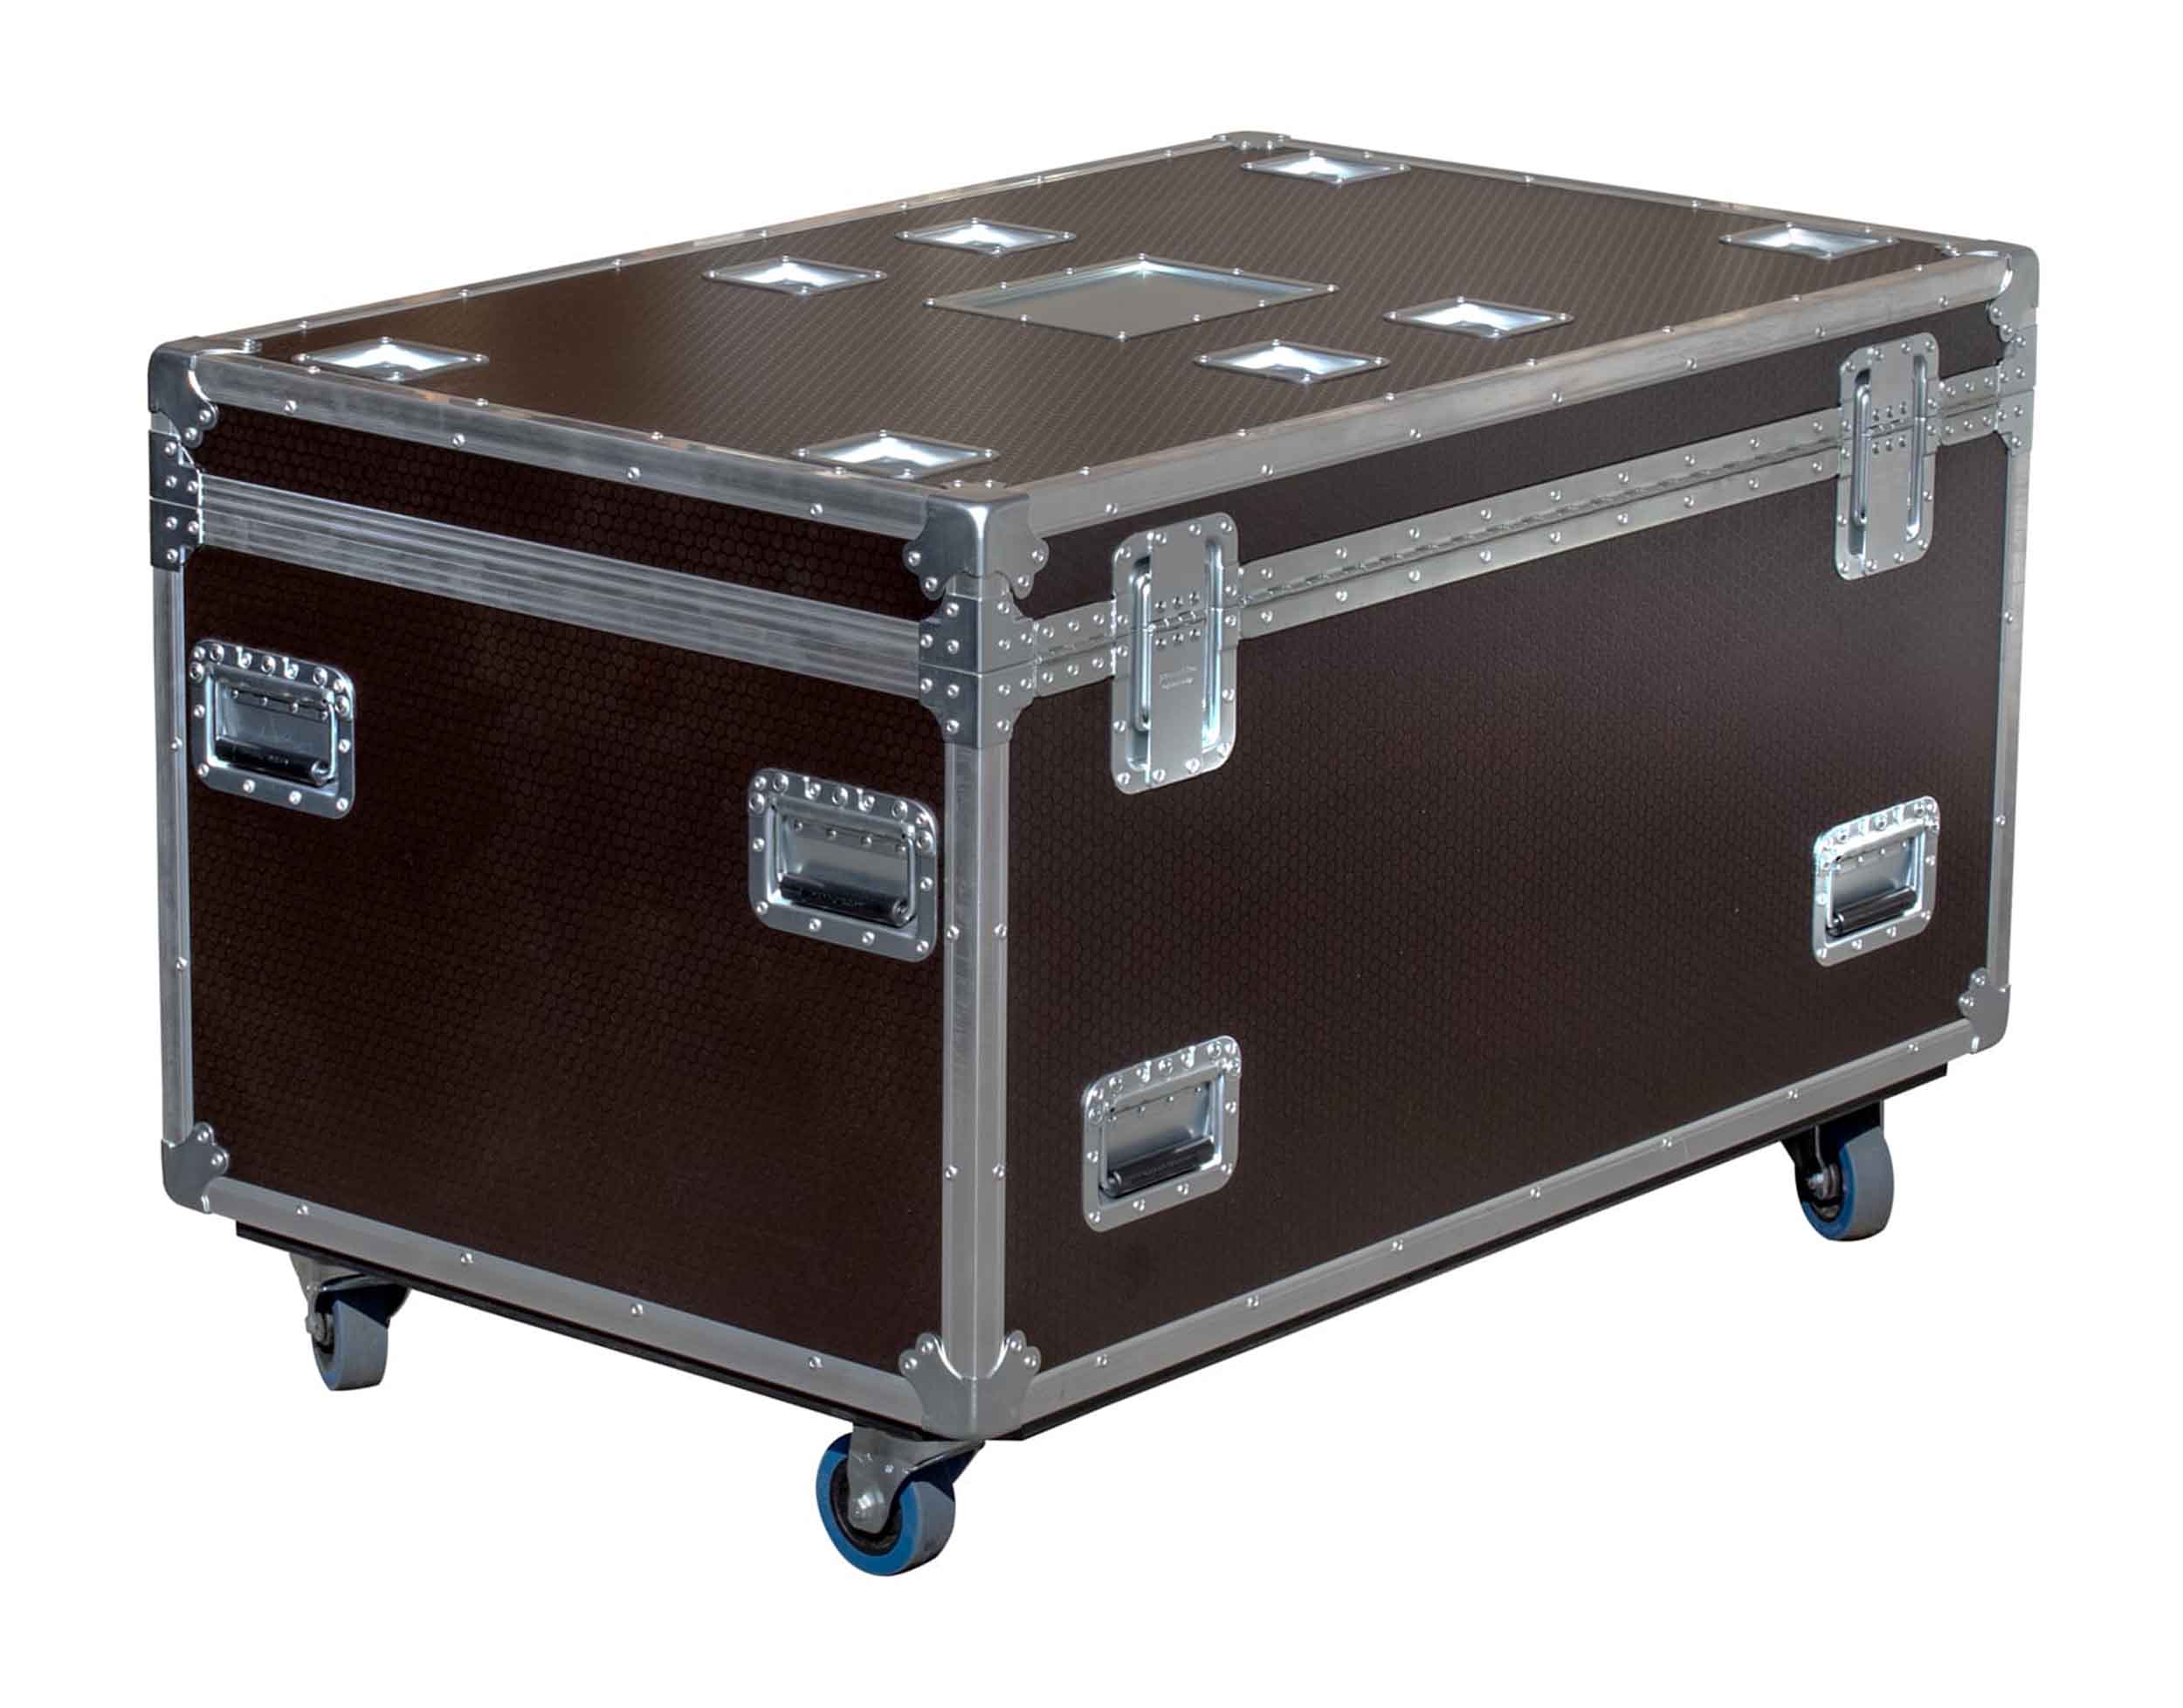 Odyssey OPT483030WBRN, Professional Brown Hex Board Utility Tour Trunk Case with Caster Wheels by Odyssey